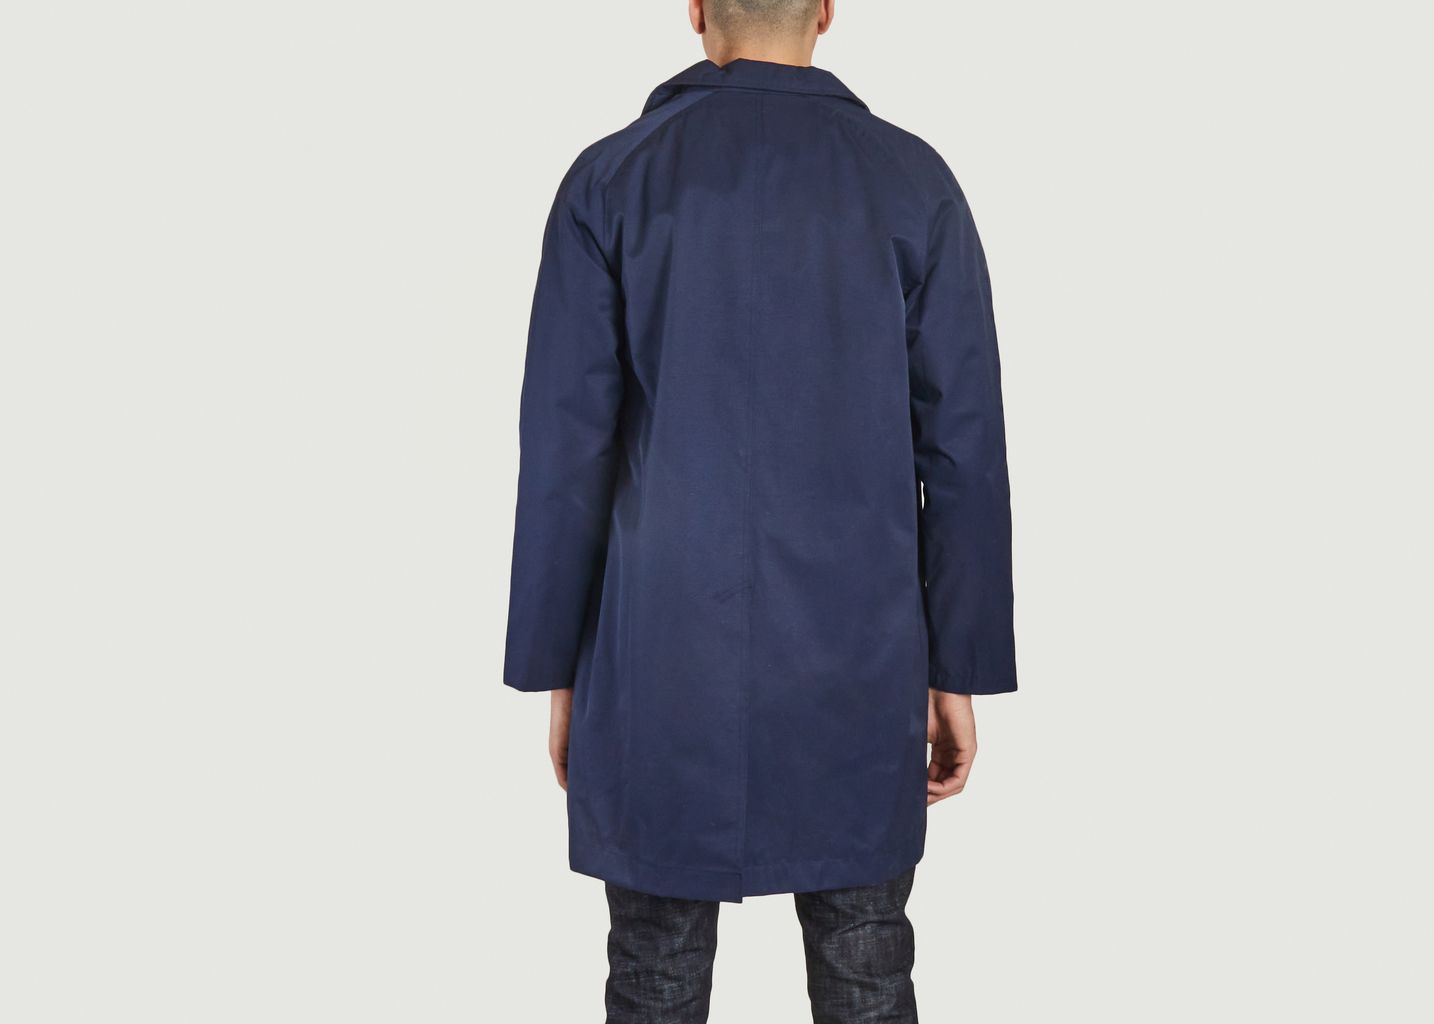 Single Breasted Mac Coat Navy - M.C. Overalls